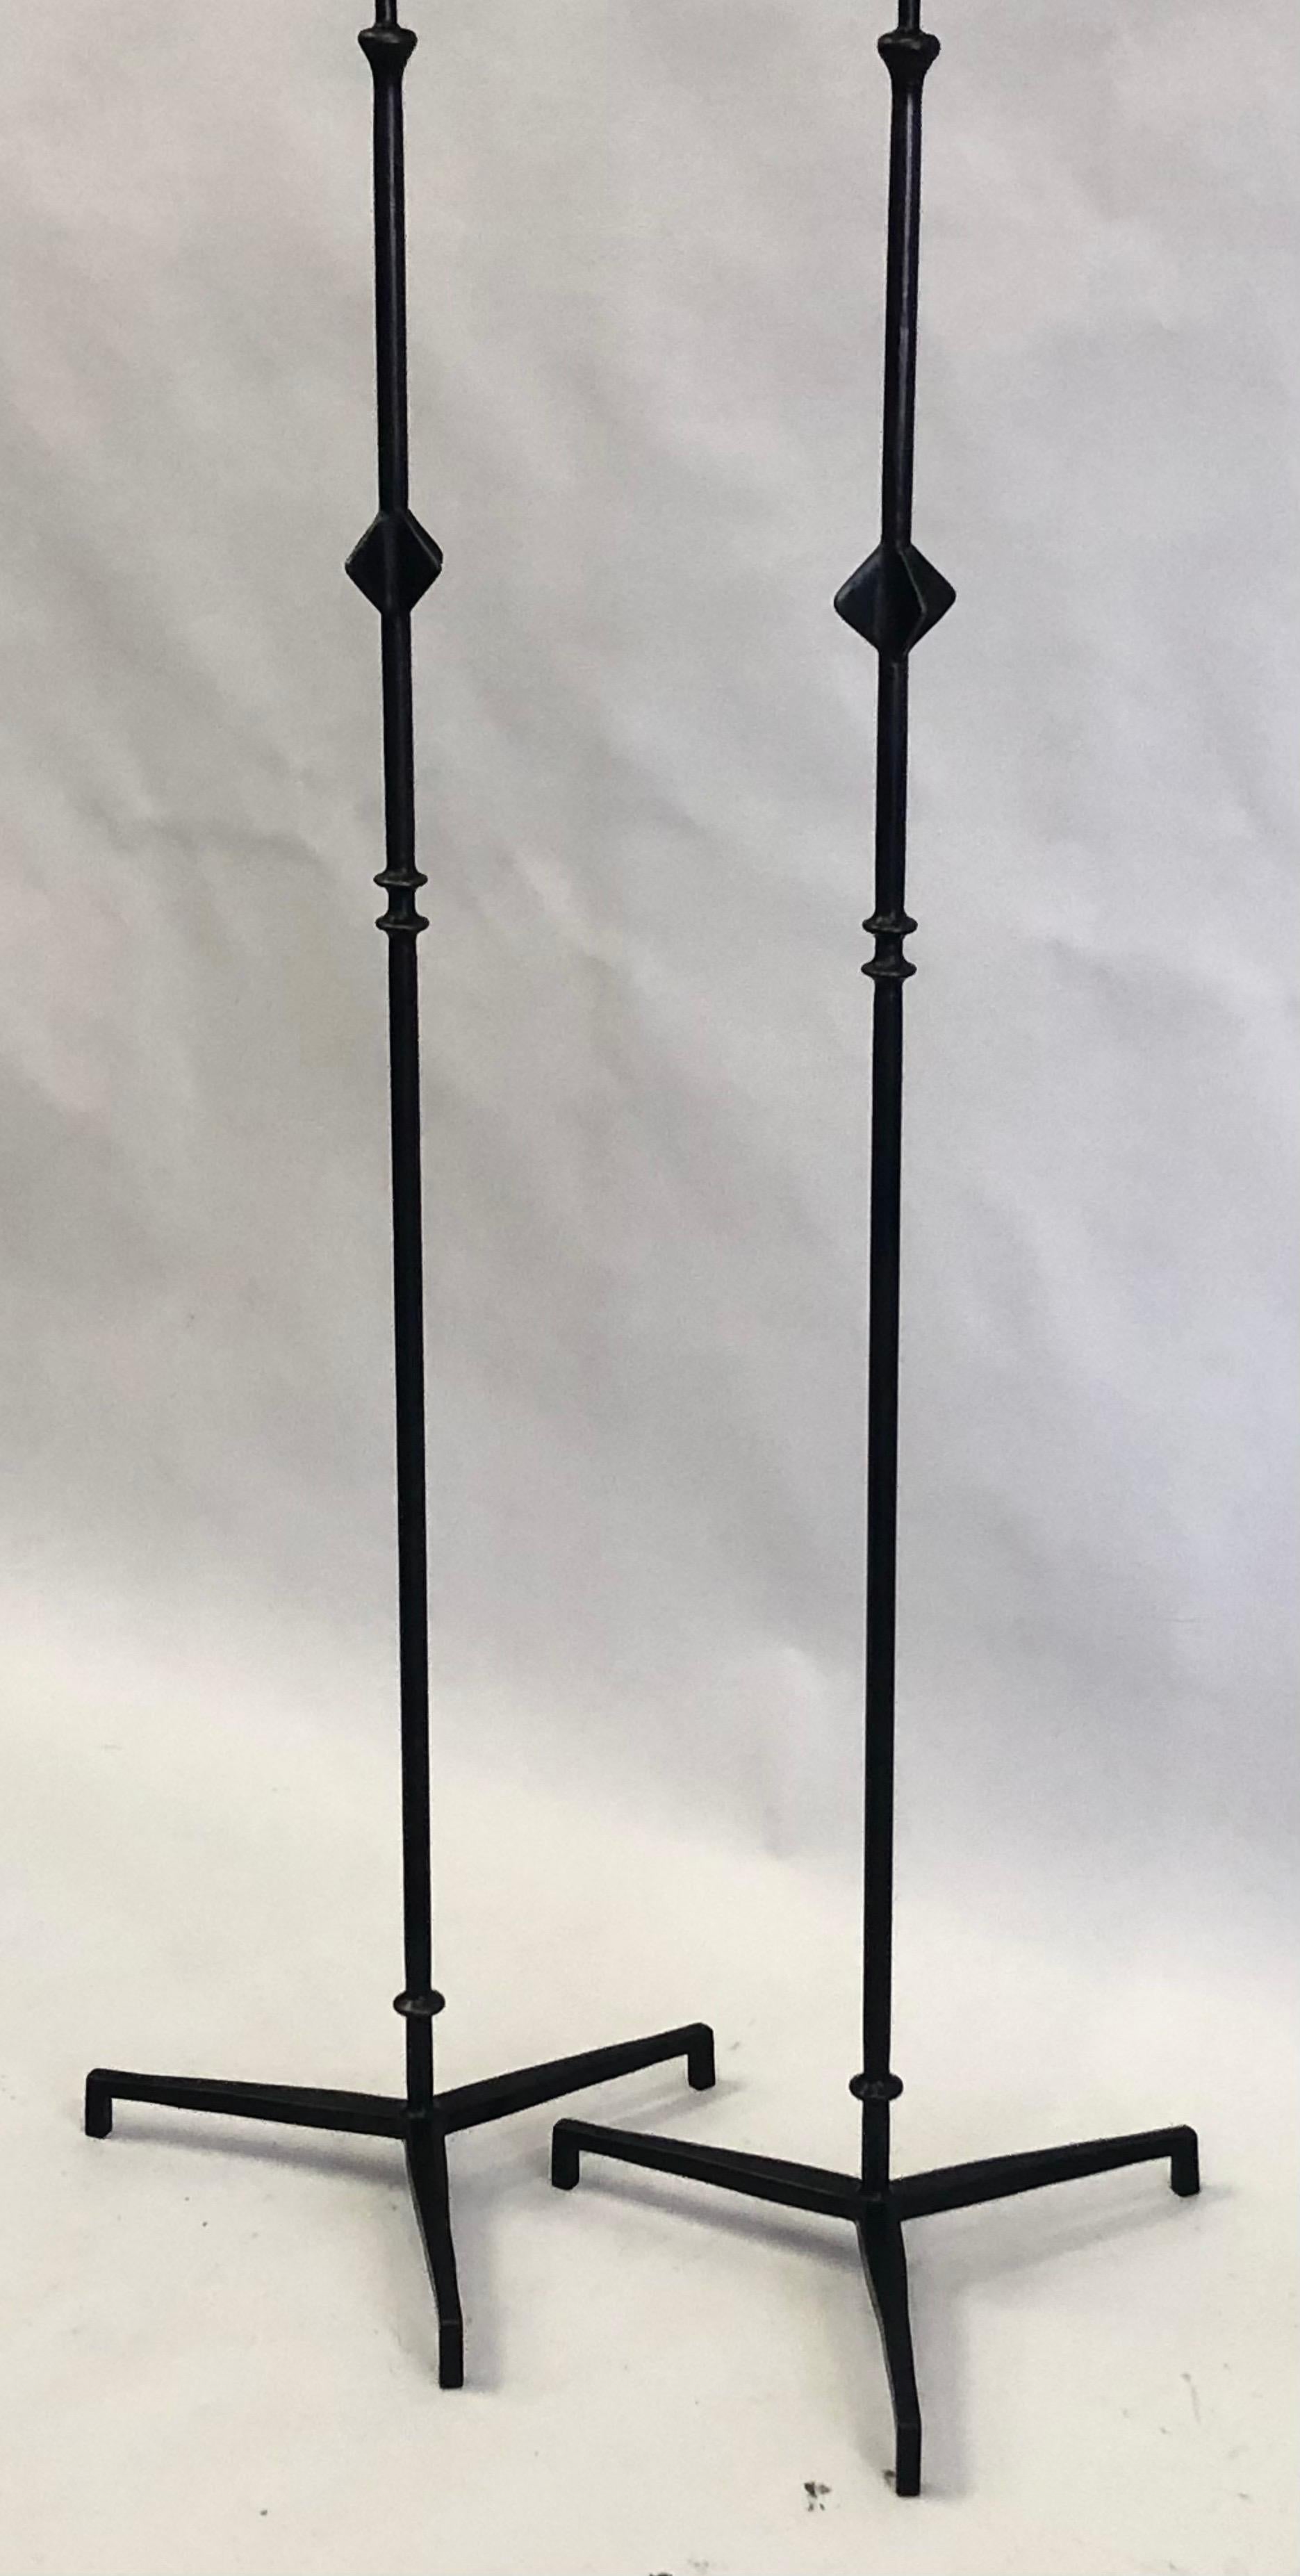 A timeless pair of French hand forged iron floor lamps decorated with the form of a star, after Alberto & Diego Giacometti for Jean-Michel Frank. Model: Pomme di Pin. The pieces can be custom forged to suit the height needed.
Dimensions: H: 72 x